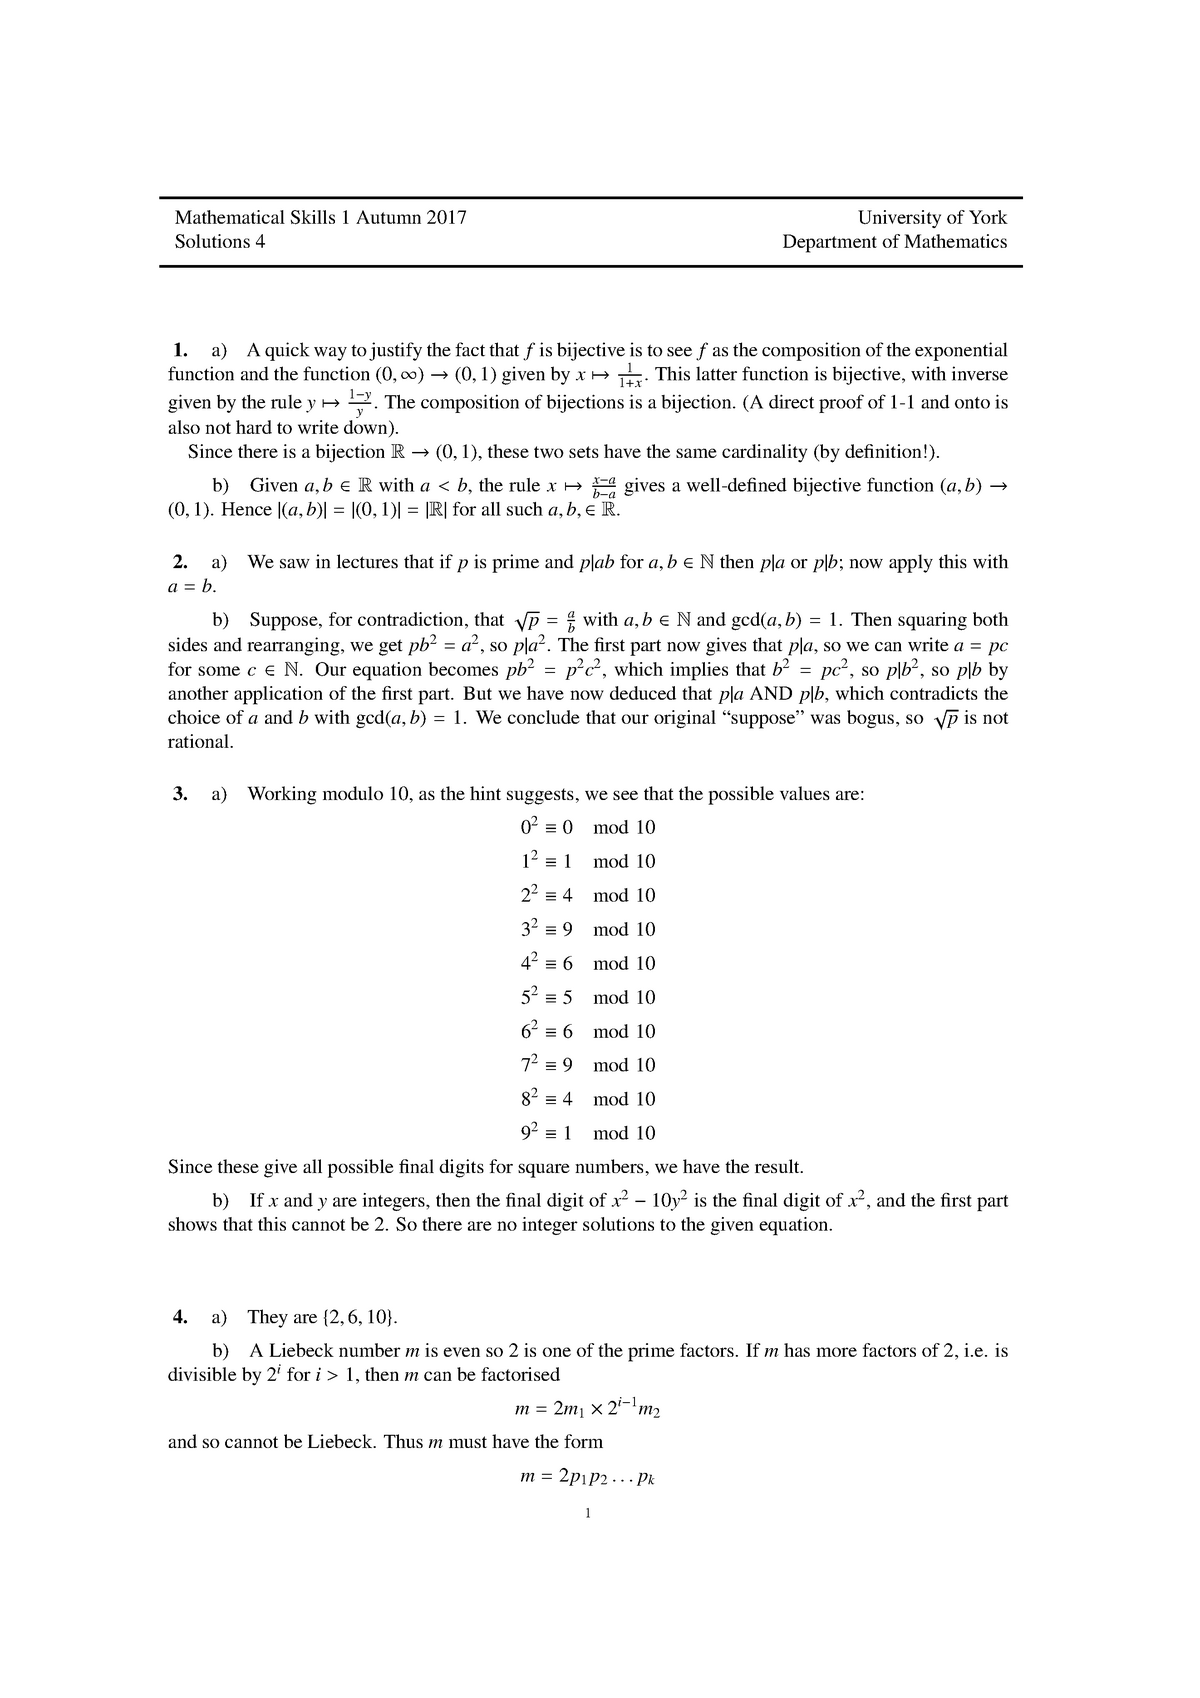 maths-skills-1-assignment-4-cardinality-and-primes-answers